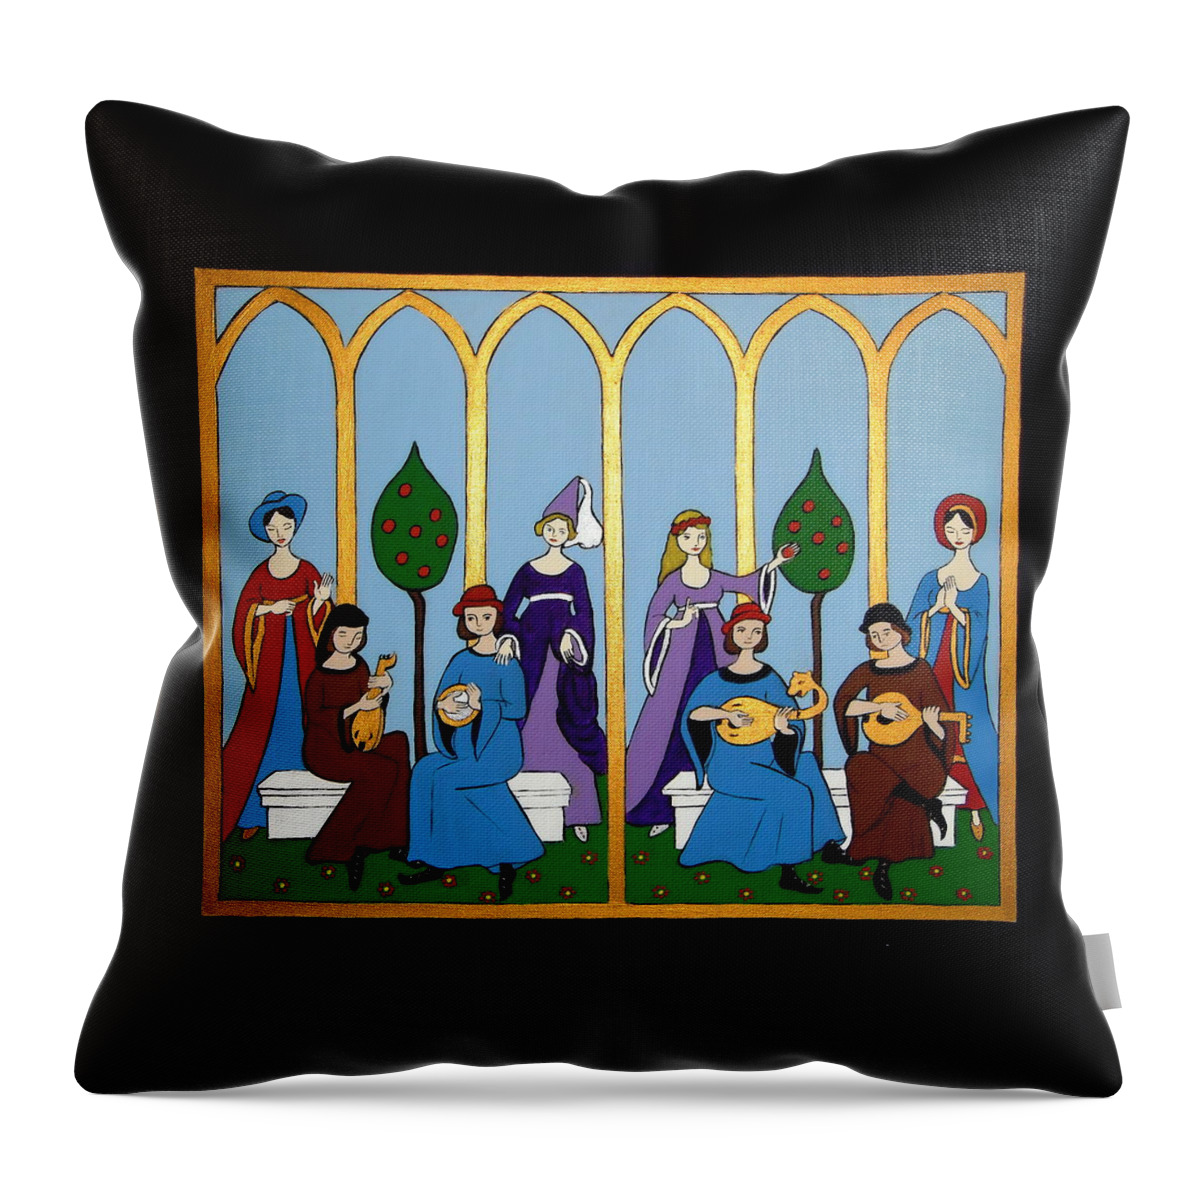 Musicians Throw Pillow featuring the painting Medieval Musicians by Stephanie Moore